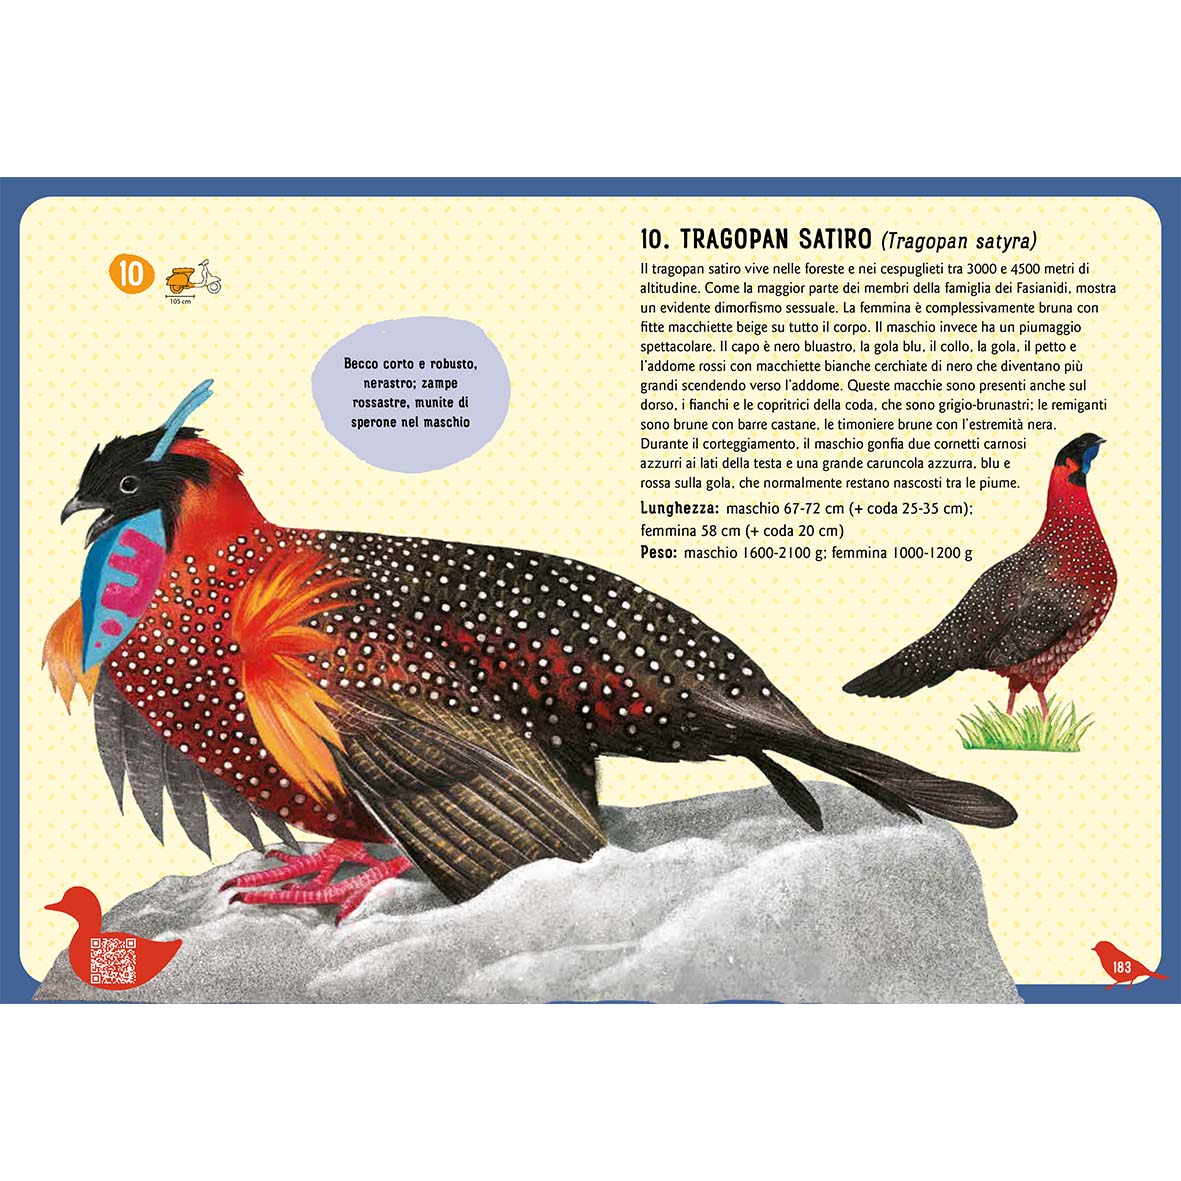 Birds of the World - An illustrated guide for children aged 0 to 109